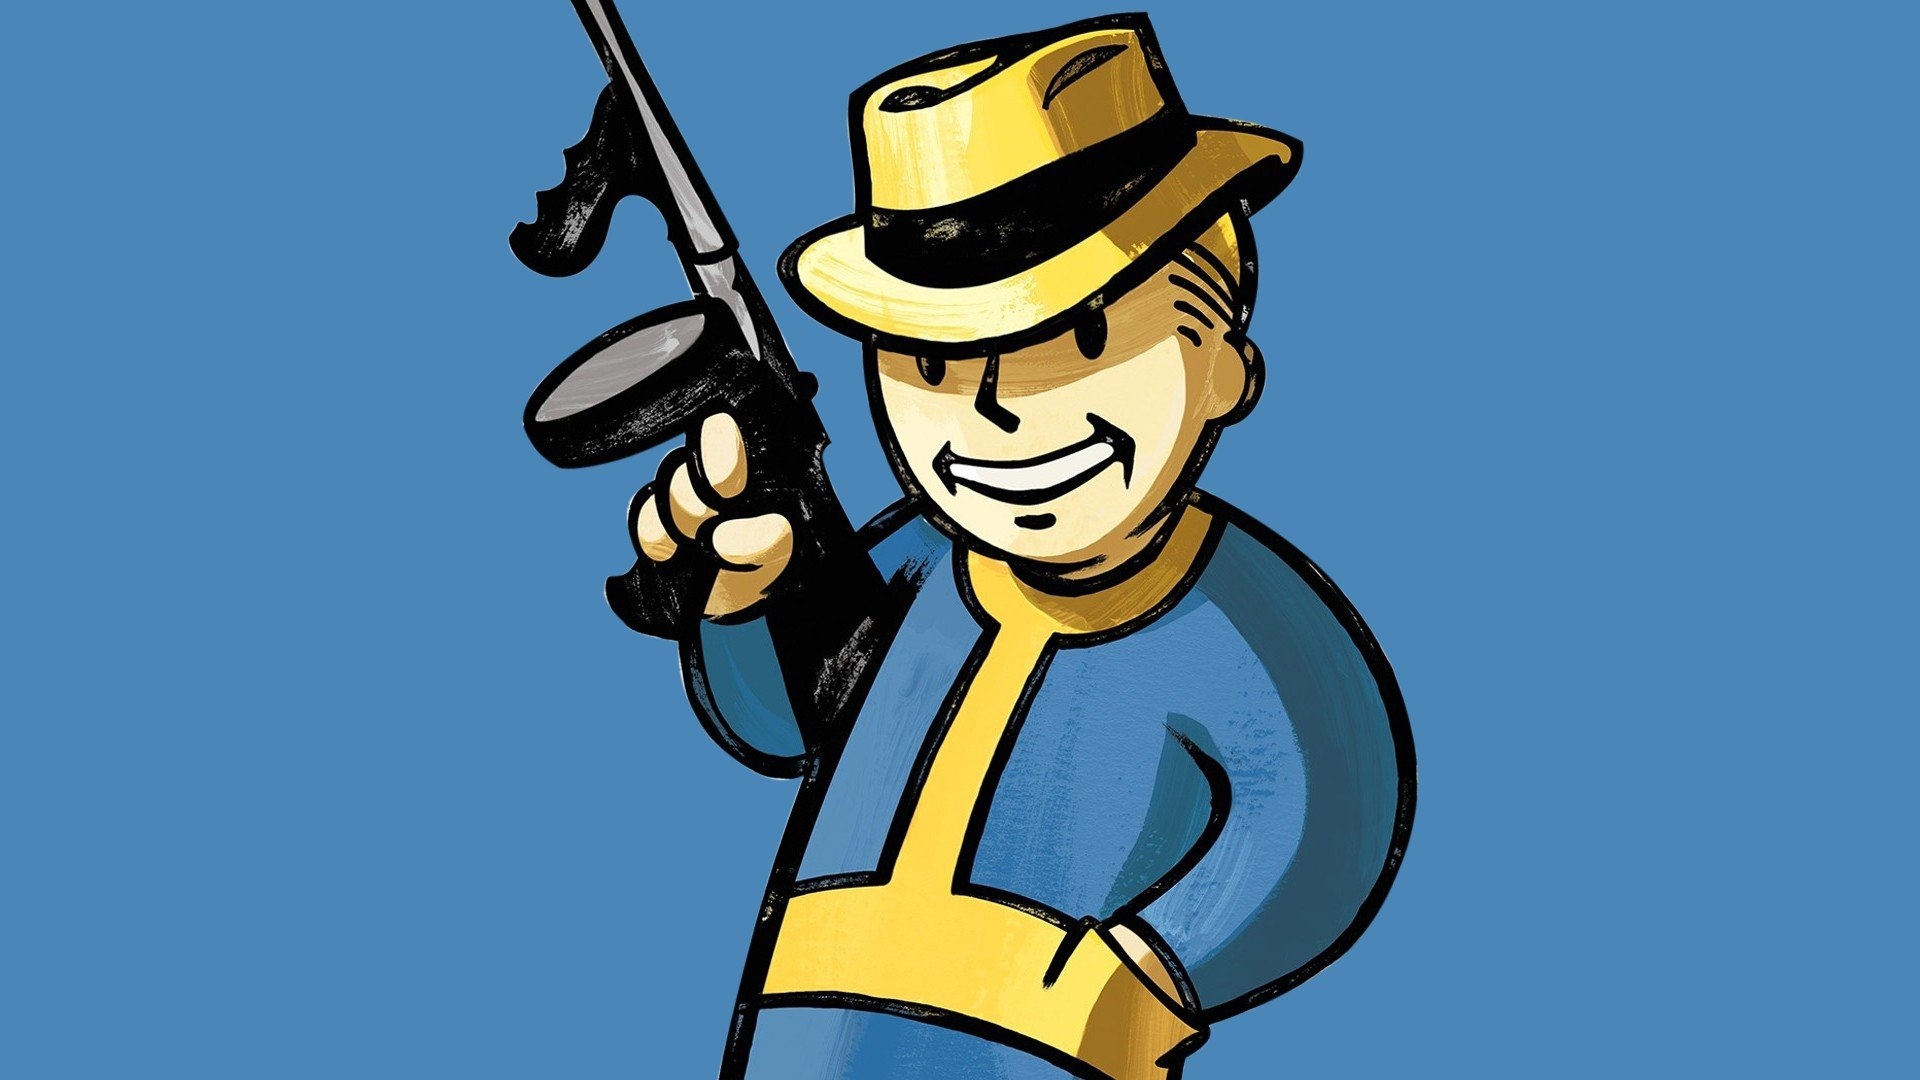 Role-Playing Game, Fallout adventure, Bethesda's creation, Pip-Boy iconic, 1920x1080 Full HD Desktop